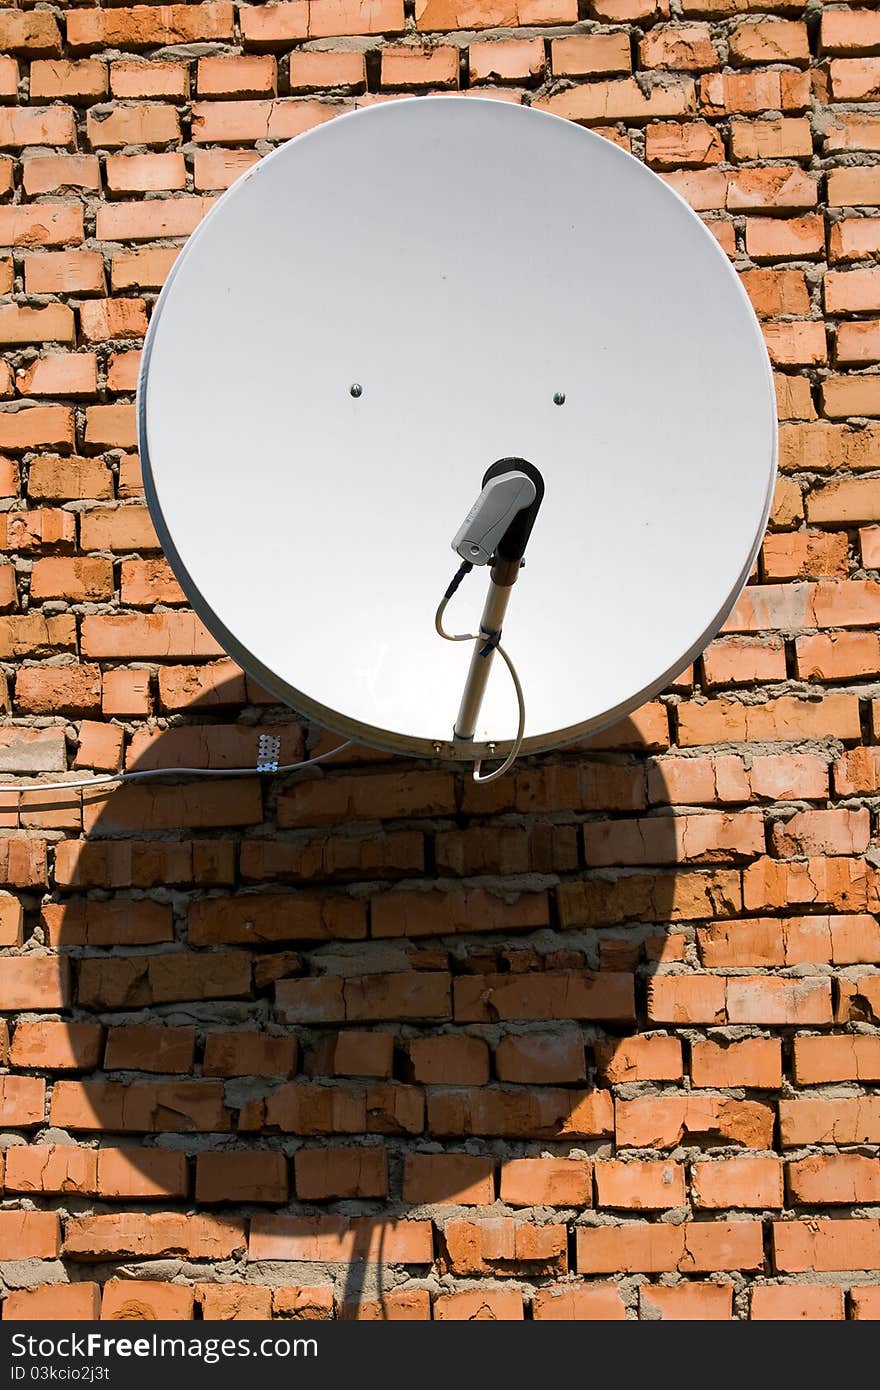 Satellite antenna on the wall of a brick house. Satellite antenna on the wall of a brick house